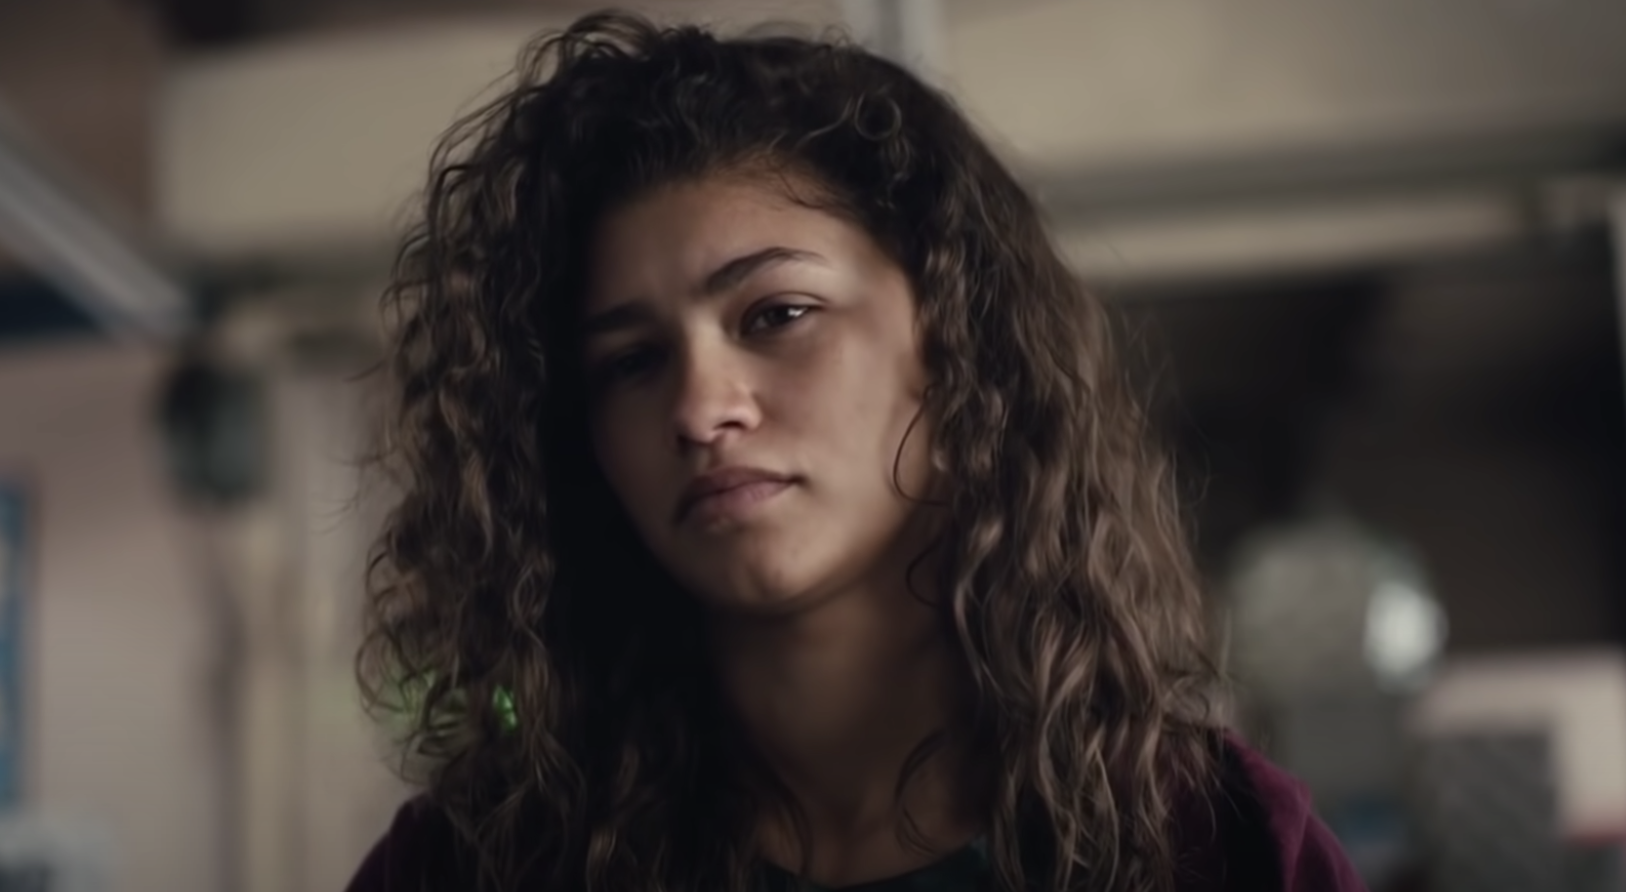 Here's What 'Euphoria' Star Dominic Fike's Face Tattoos Mean